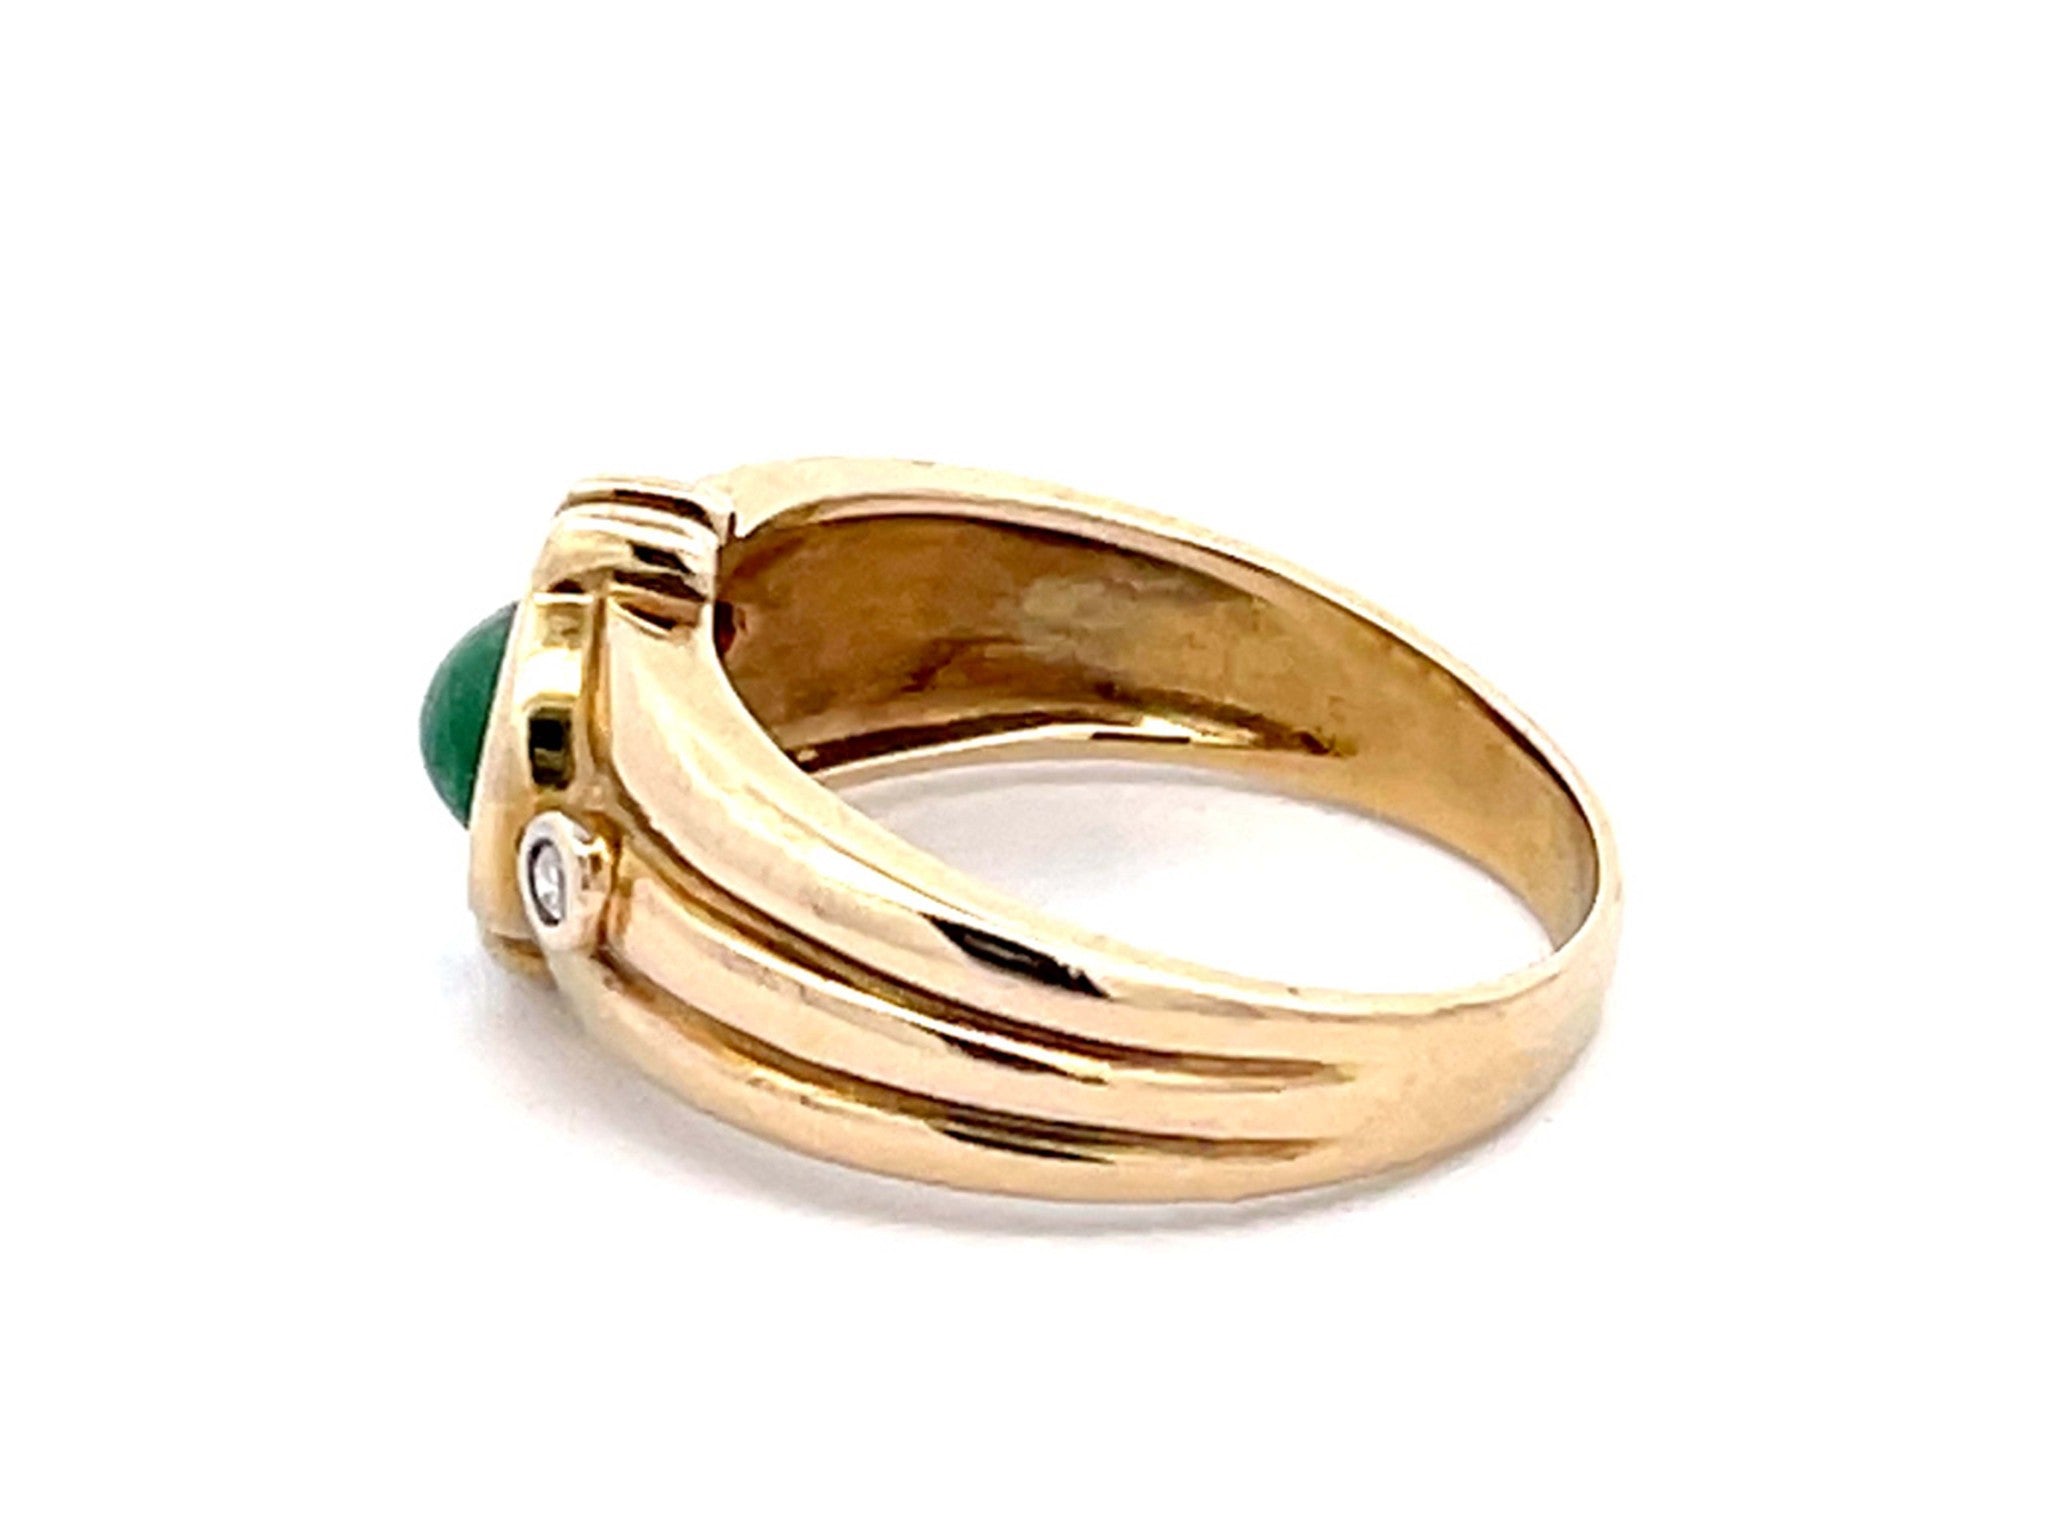 Oval Green Cabochon Emerald and Diamond Ring in 14k Yellow Gold